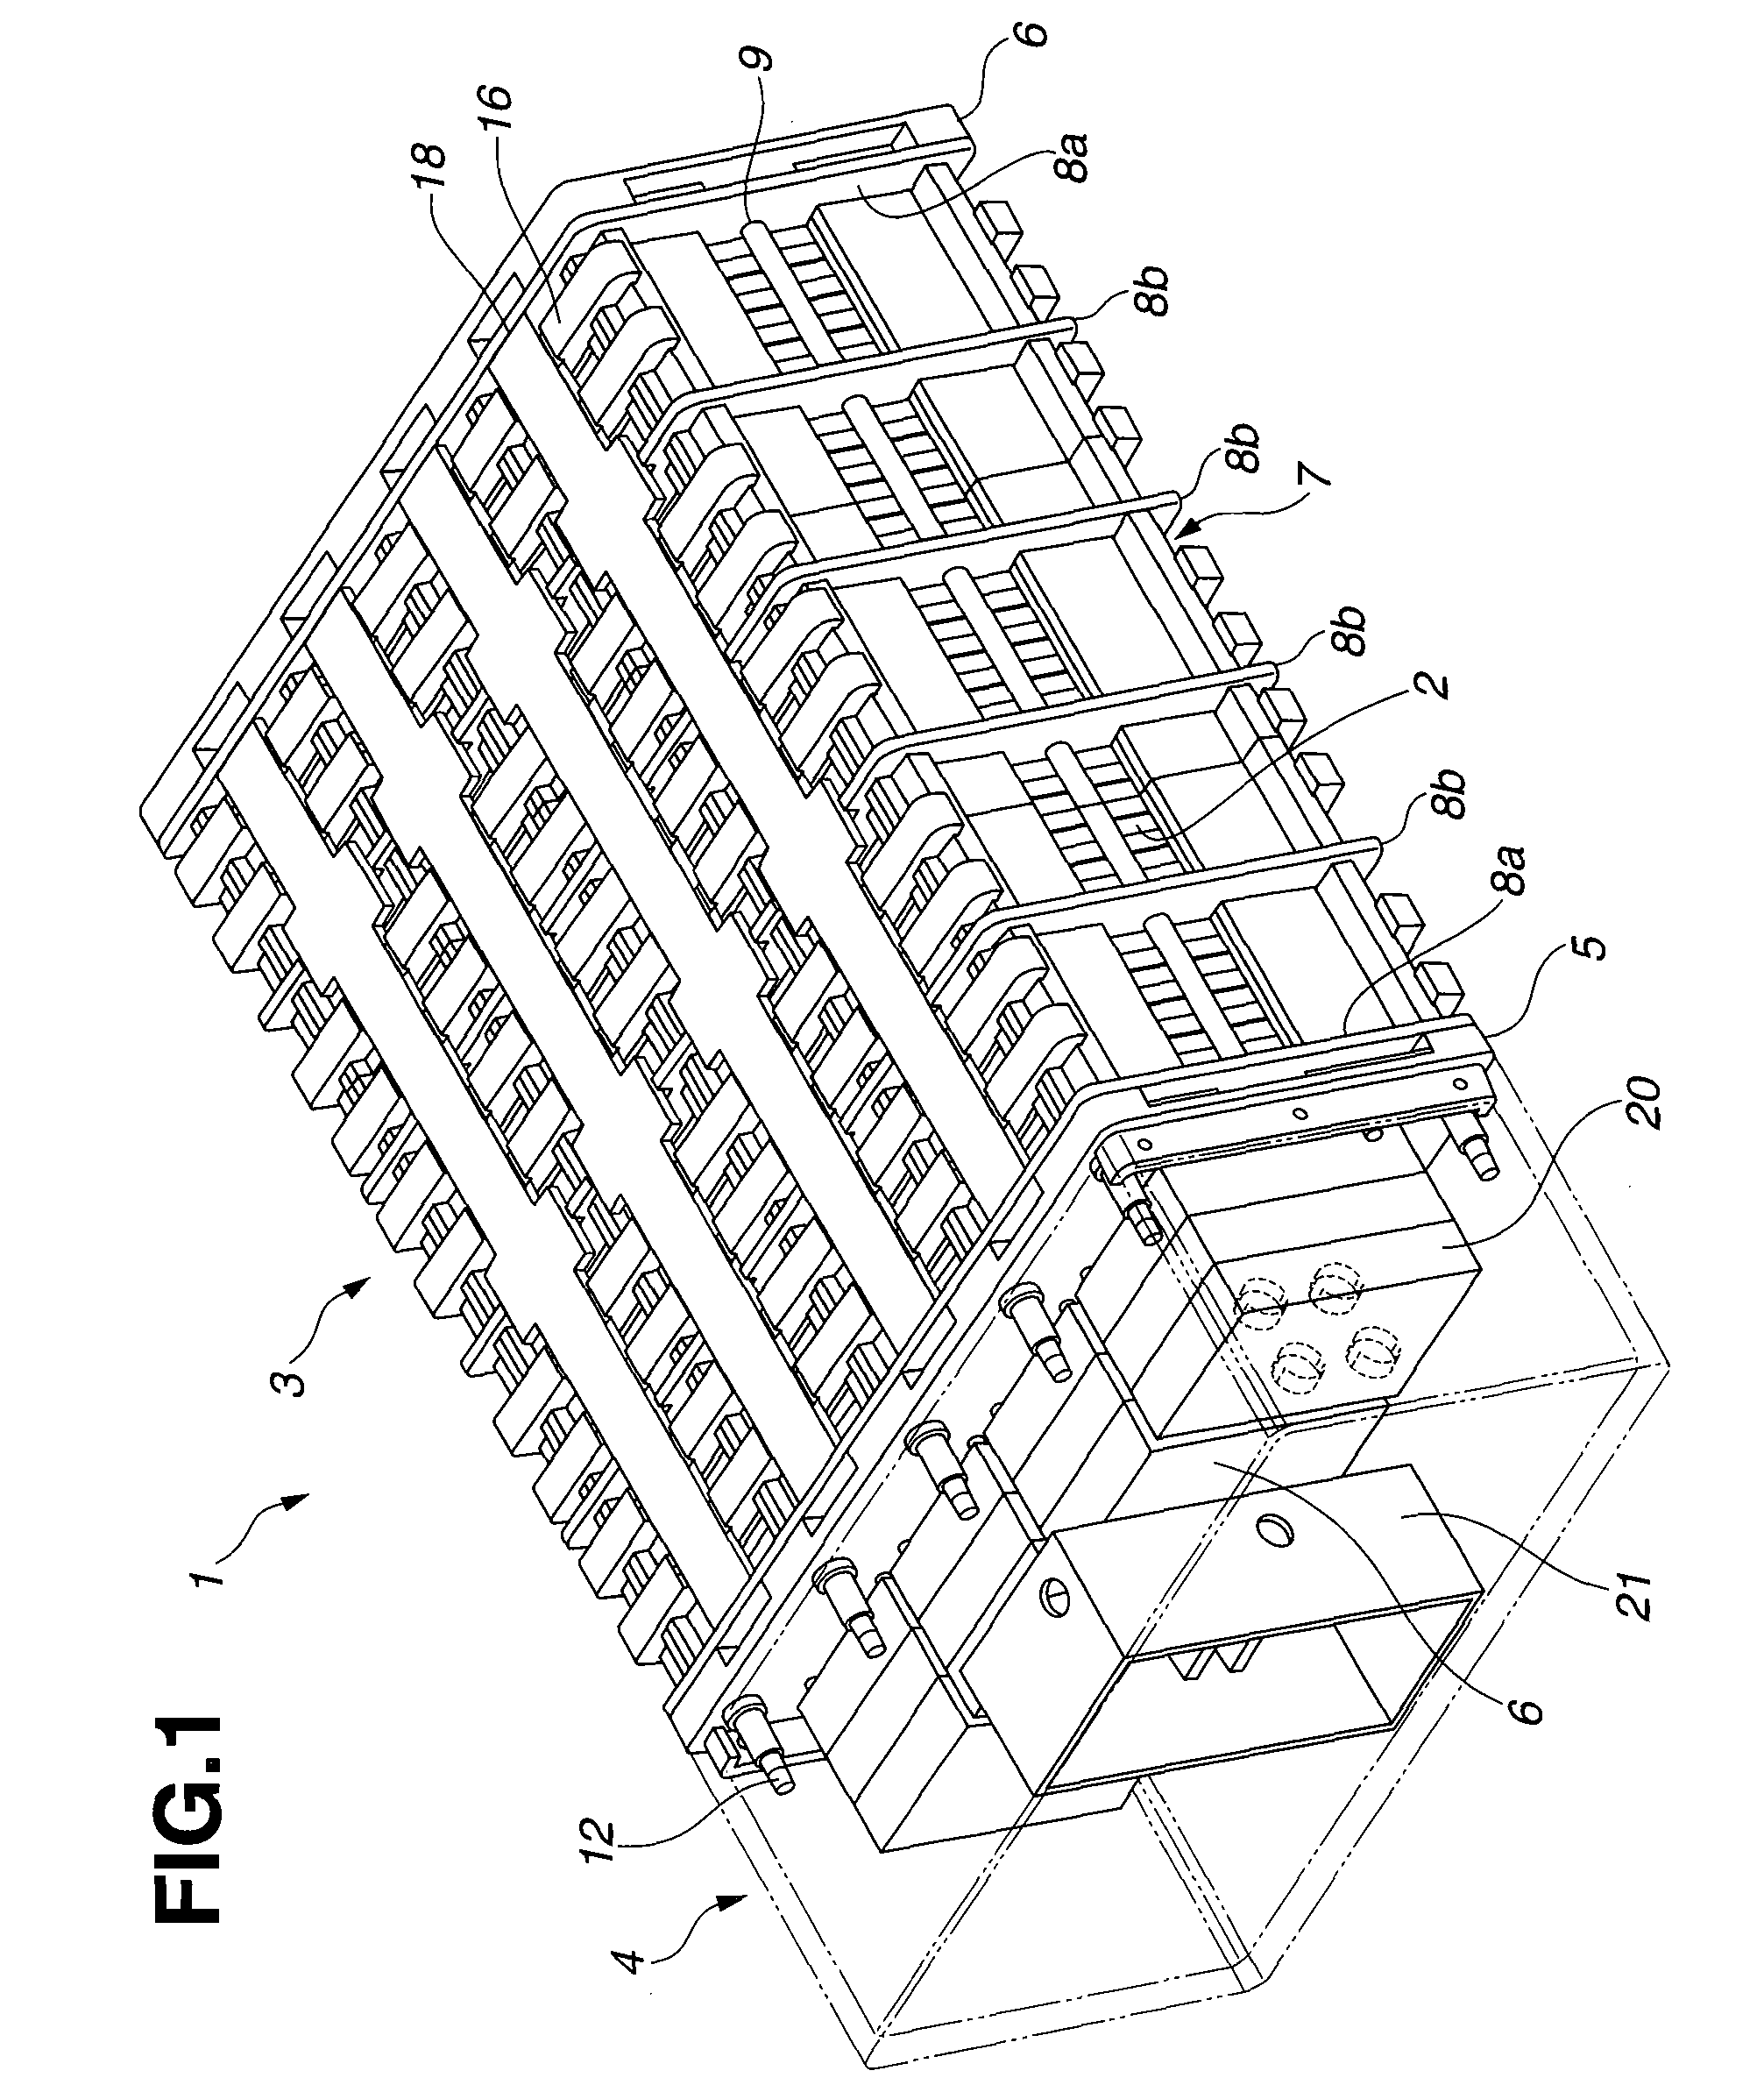 Packaging structure of electric storage cells